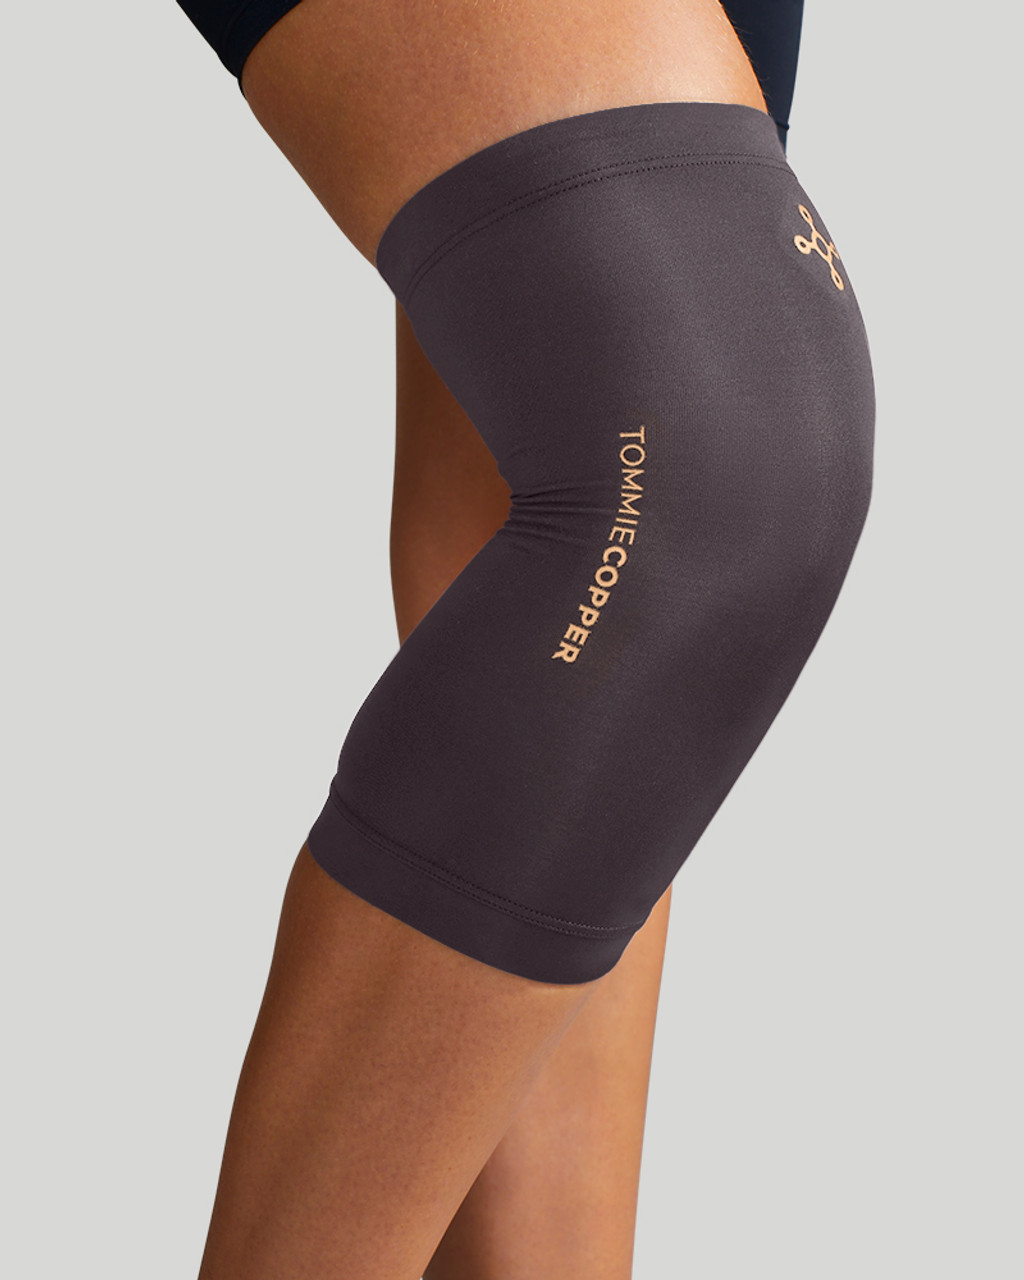 Tommie Copper Compression Full Leg Sleeve Joint Pain Relief L/XL - D19